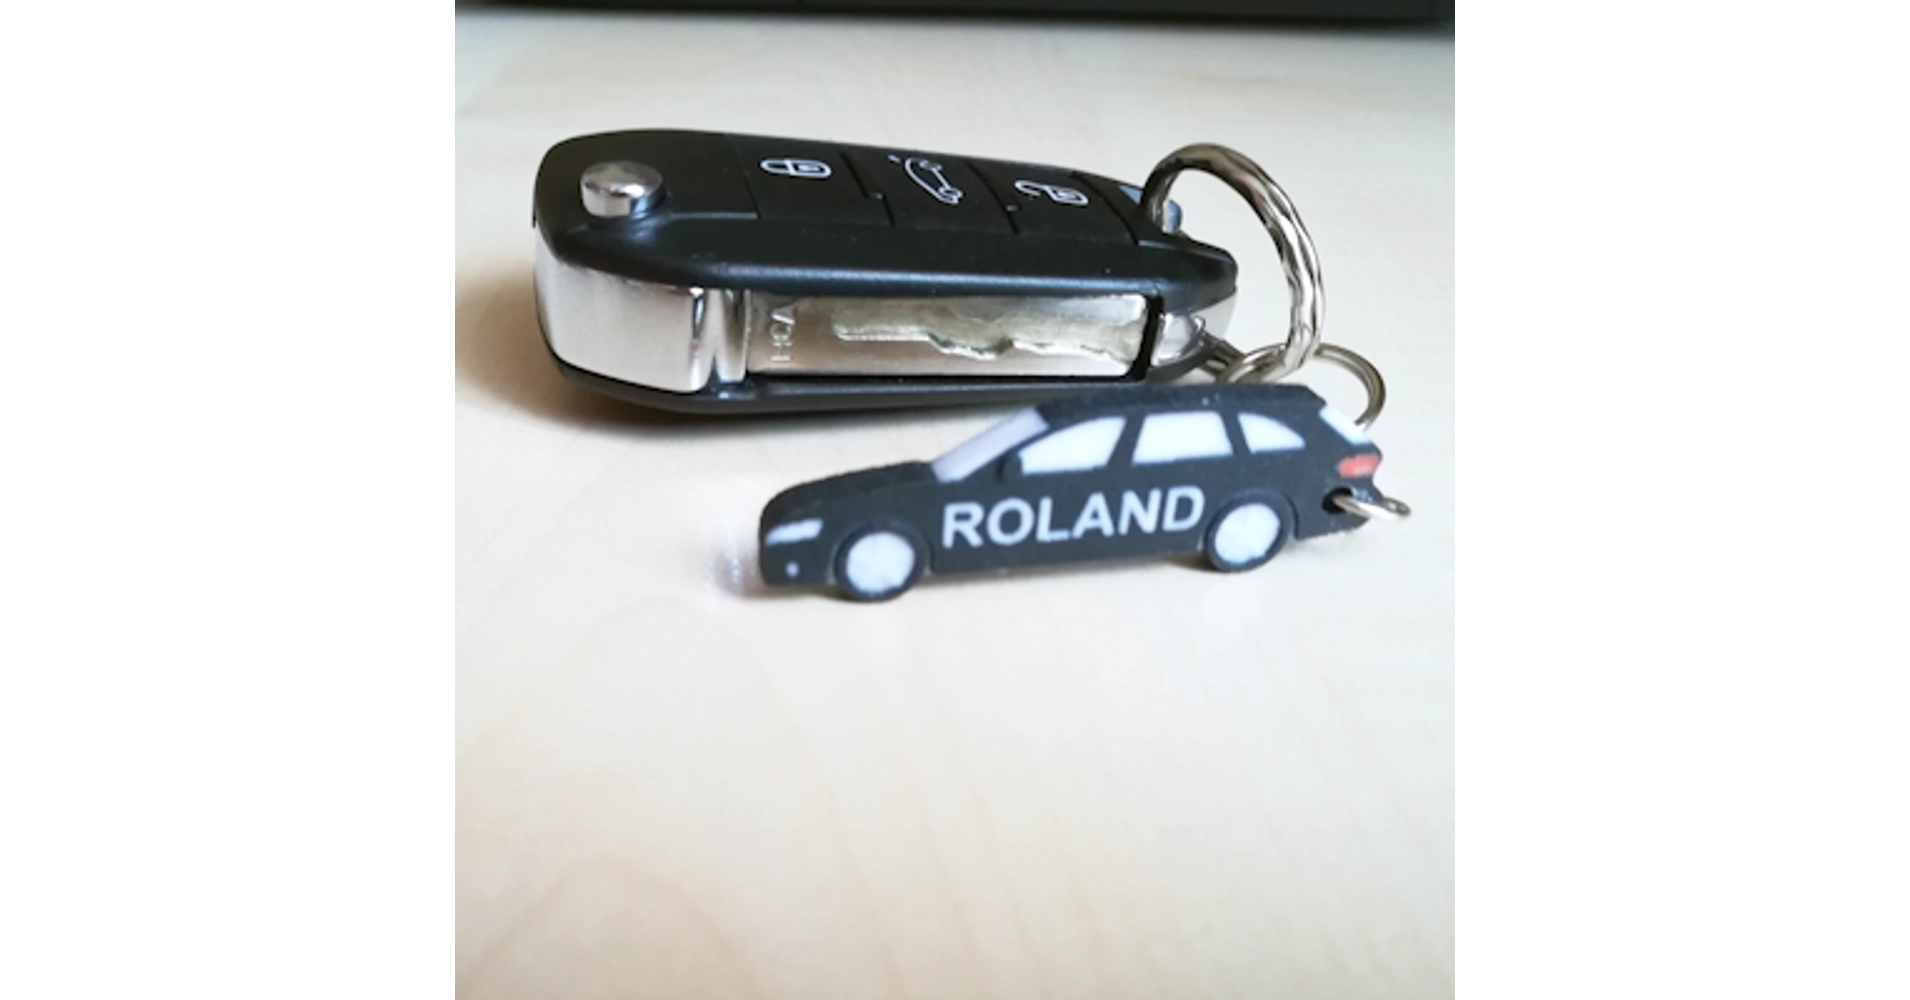 3D printed Audi A4 Combi Keychain - 3D Printed Product - creative gift  (DIY).